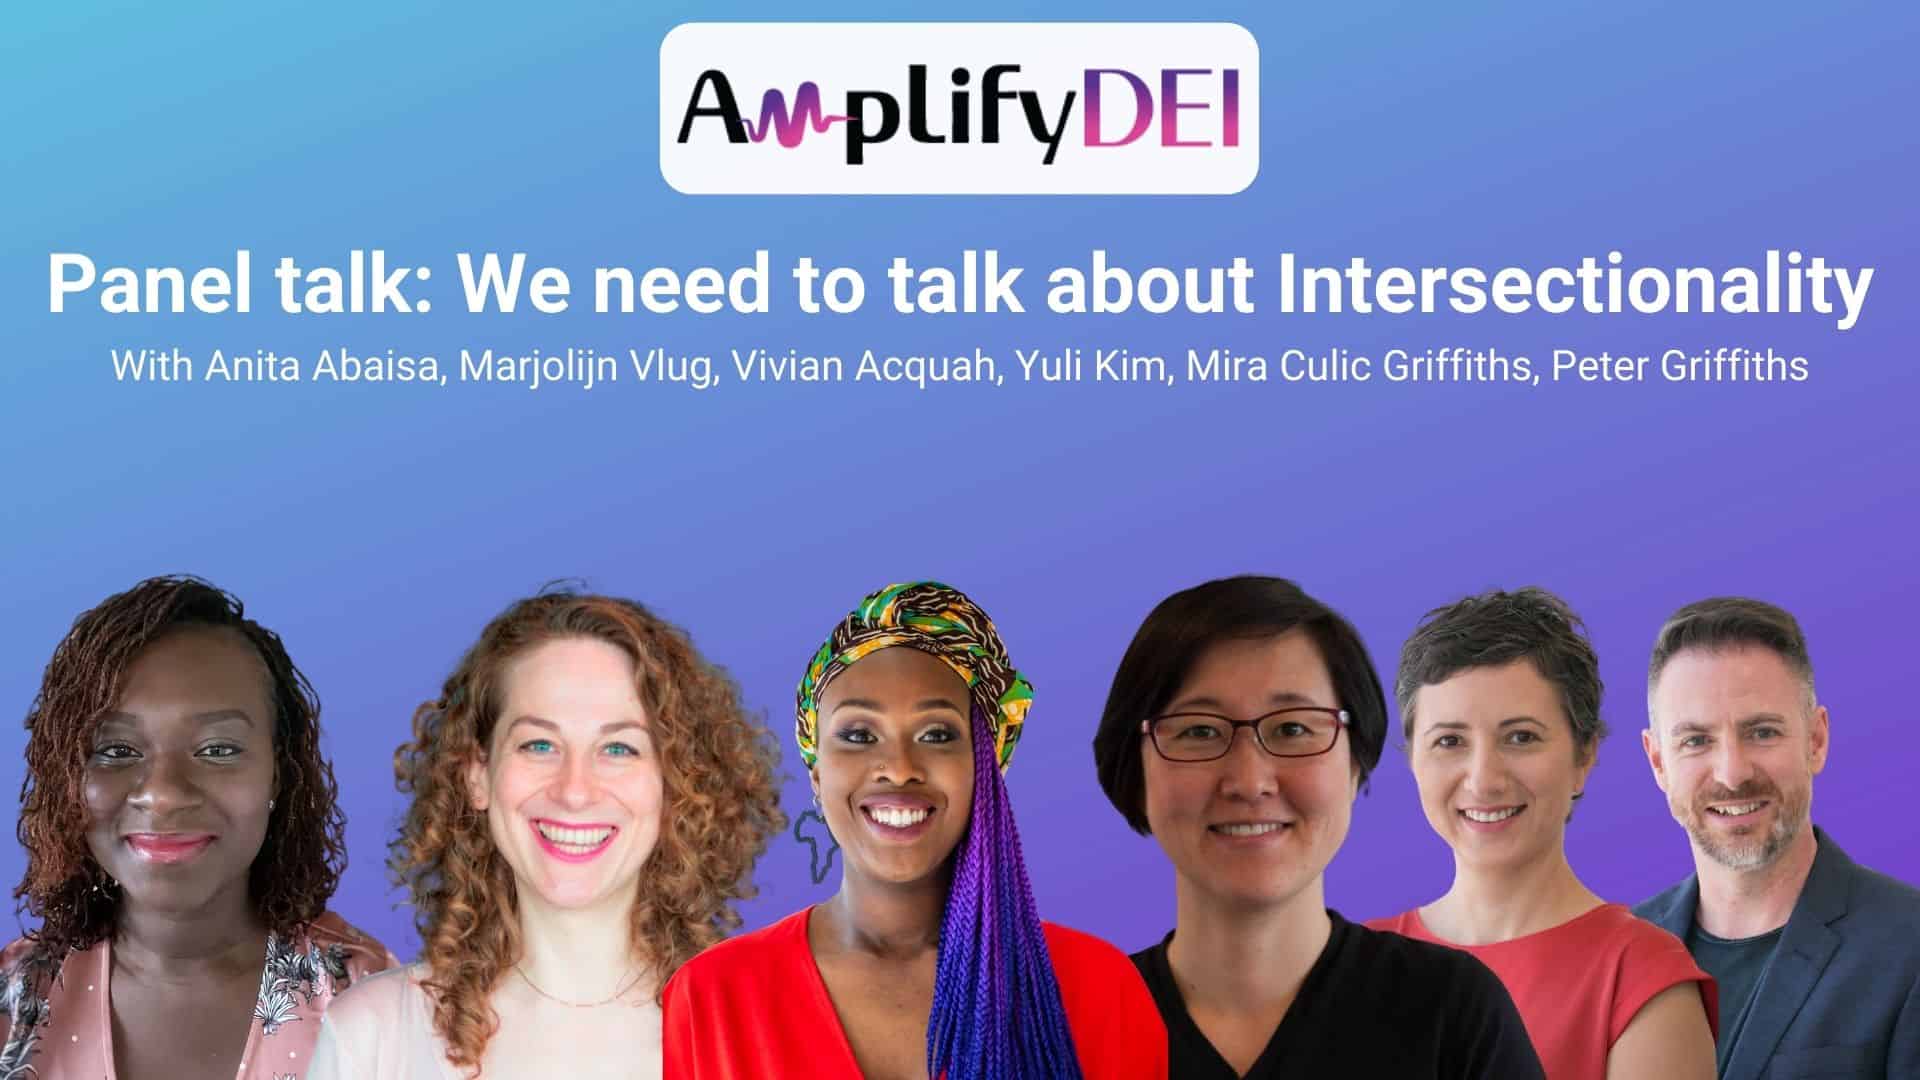 Amplify DEI Embracing Intersectionality in the Workplace